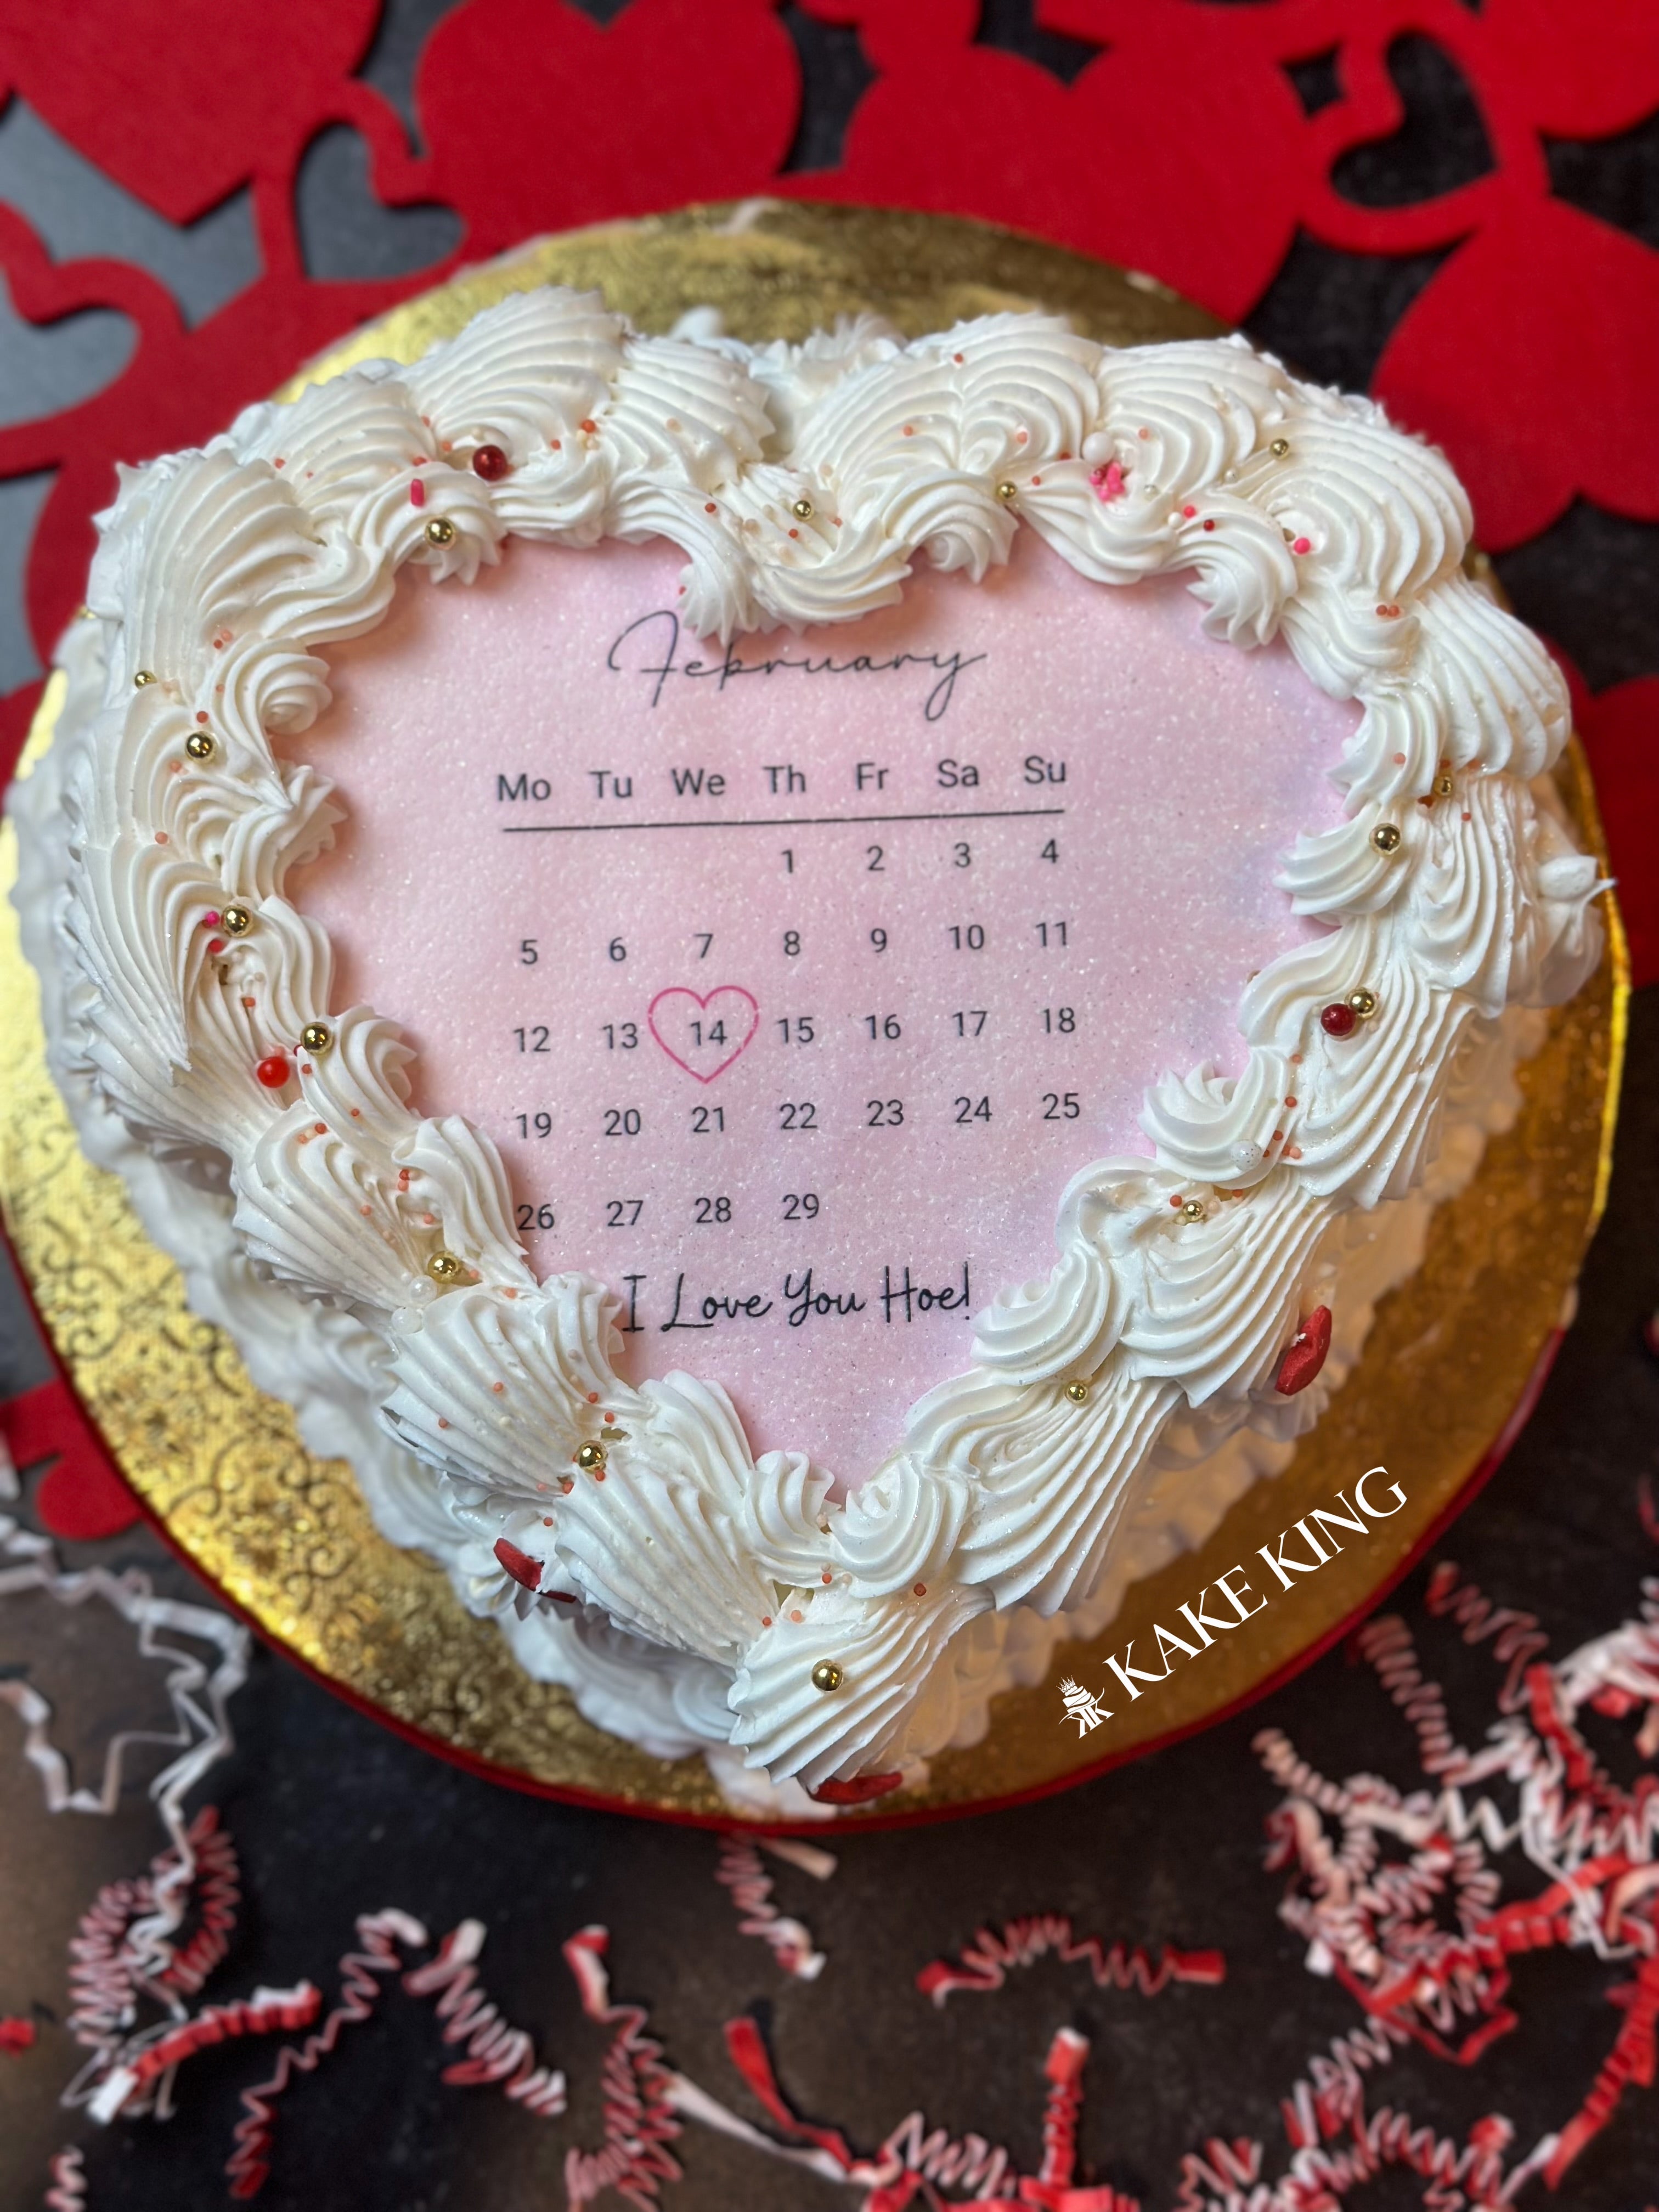 Red Rose Birthday Cake - The Cakery - Leamington Spa & Warwickshire Cake  Boutique